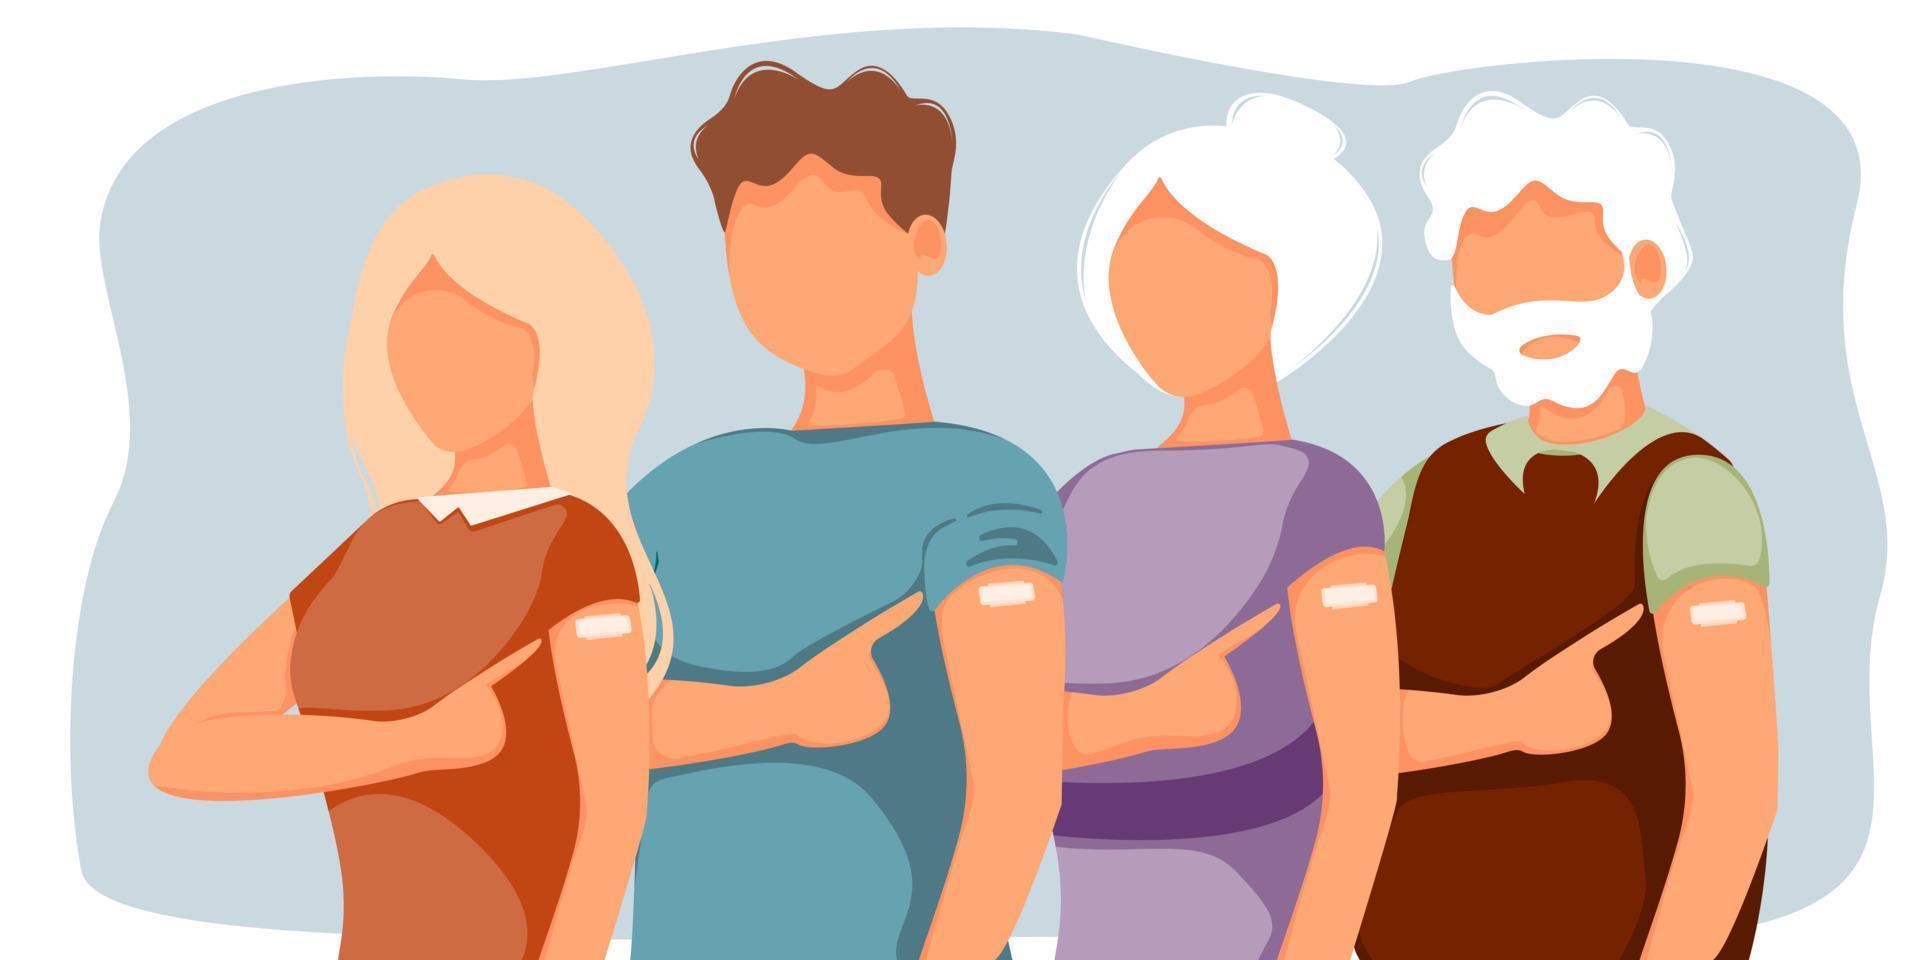 Vaccinated people showing at their arm. The concept of vaccination, health, the spread of the vaccine, healthcare, call of fight against coronavirus. Colorful vector illustration in flat style.